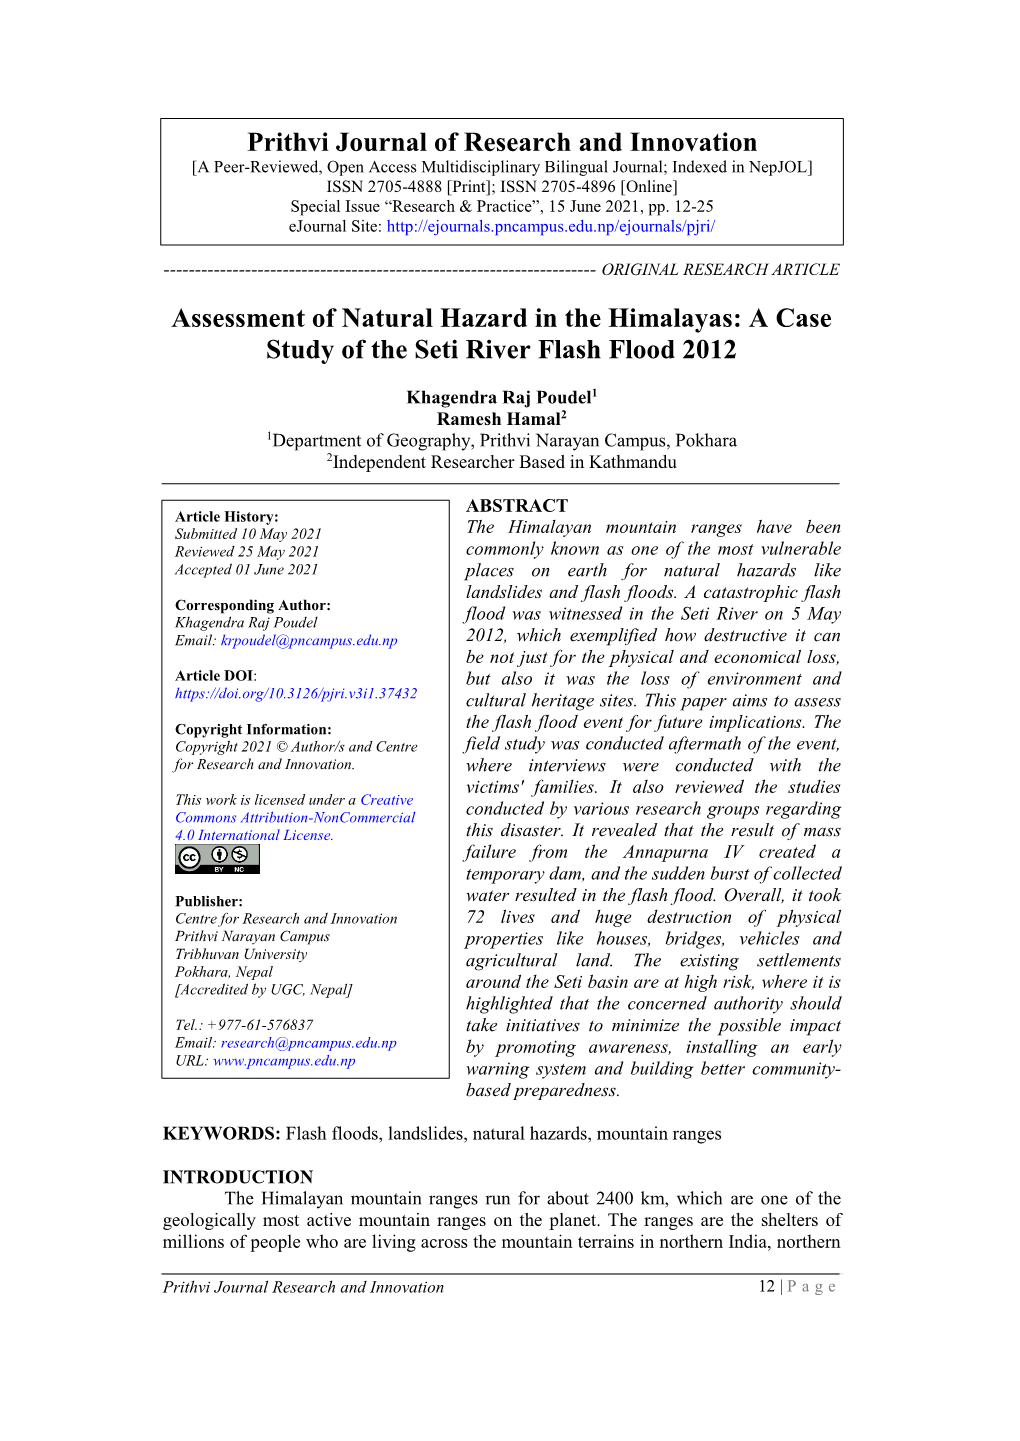 Assessment of Natural Hazard in the Himalayas: a Case Study of the Seti River Flash Flood 2012 Prithvi Journal of Research and I